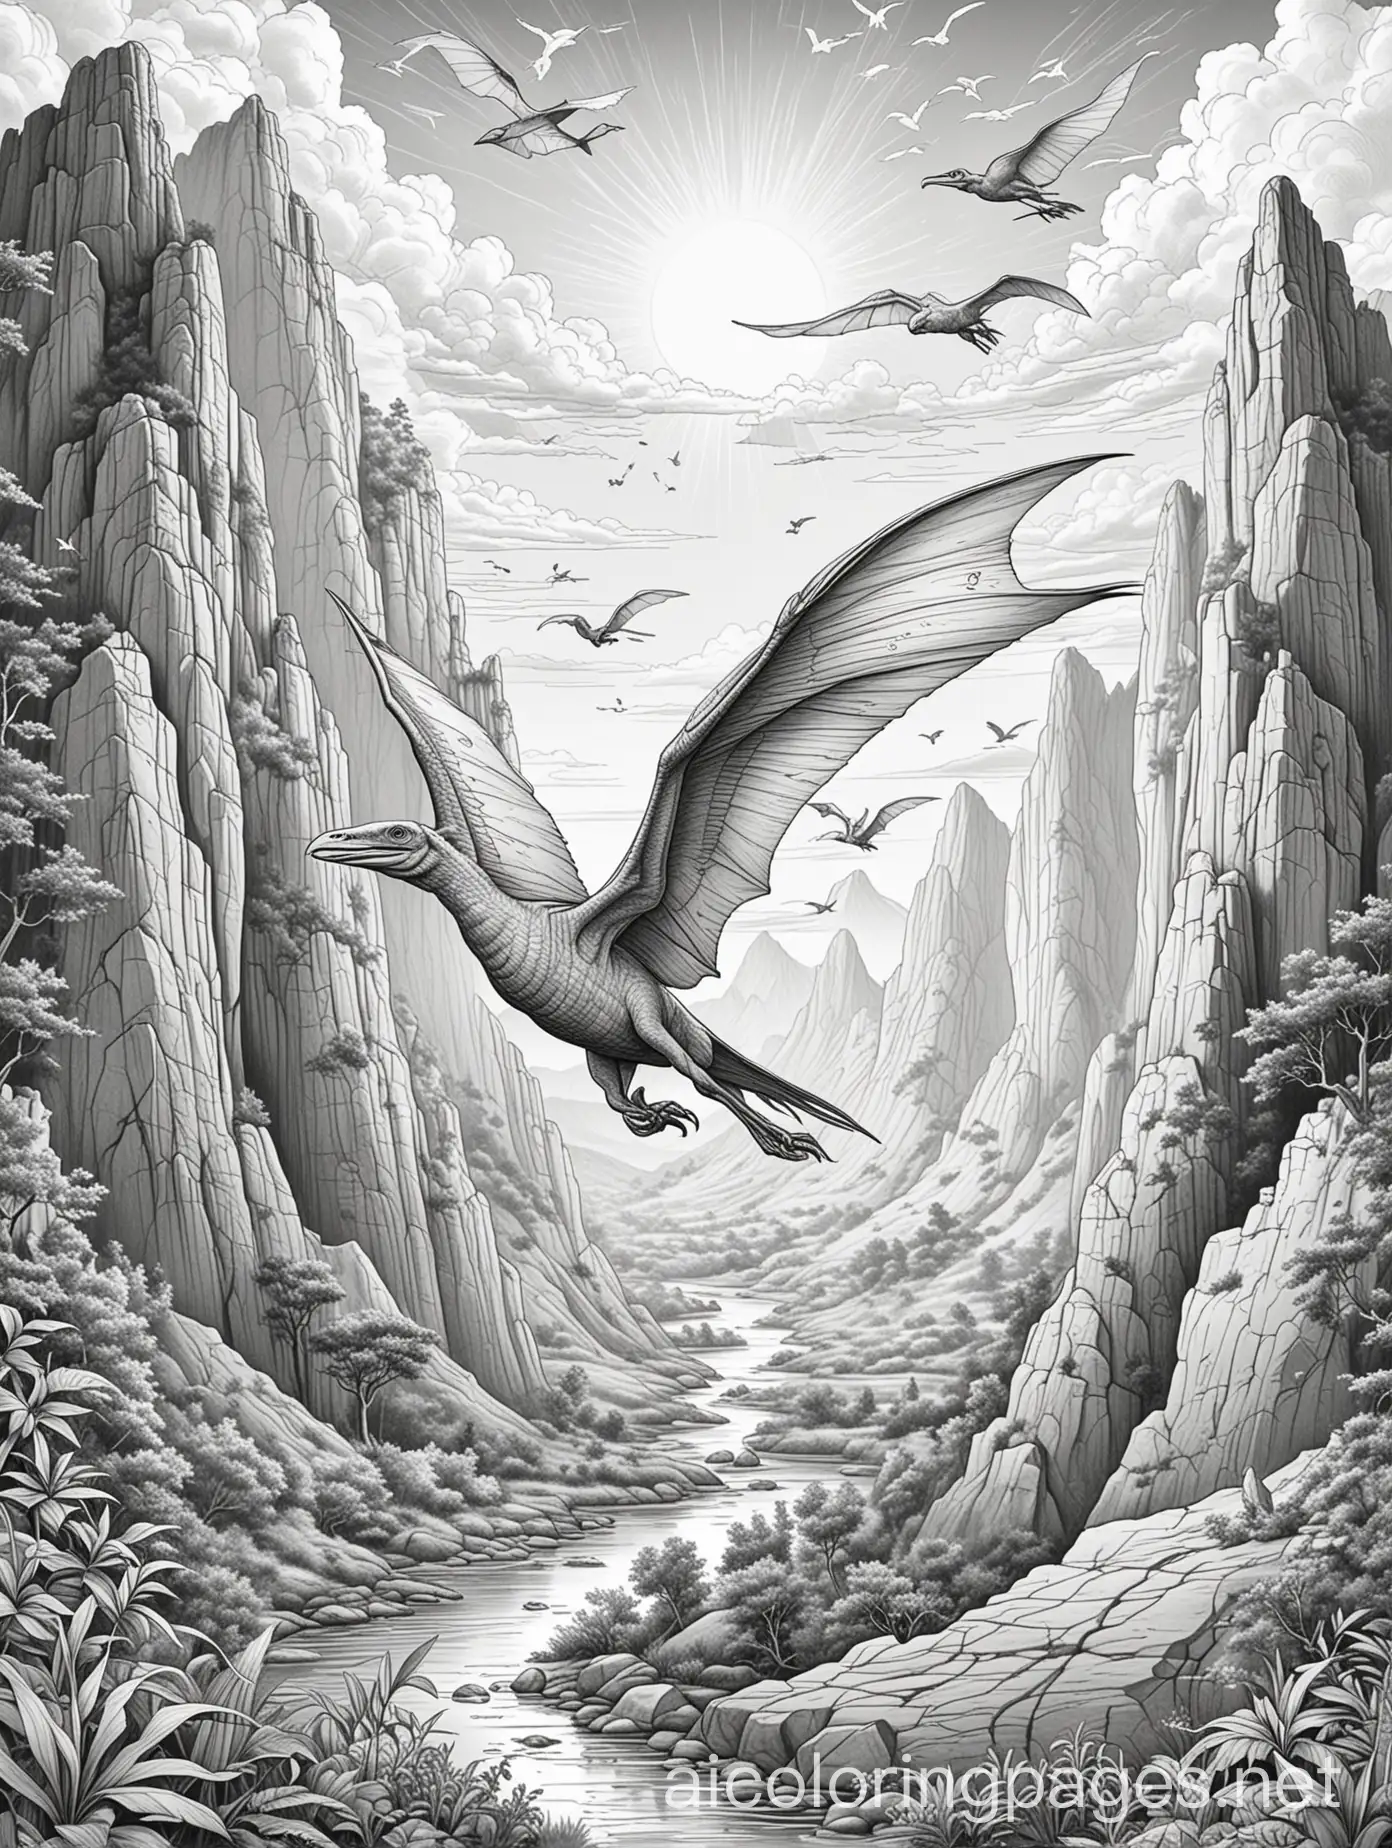 Create a coloring page of a Pterodactyl in a prehistoric environment for a children's coloring book. The scene must include the following elements:nnPterodactyl: Central in the image, the Pterodactyl must be in full flight, with open and detailed wings. Show off your wingspan and the characteristic shape of your head.nEnvironment: An aerial scene with mountains or cliffs in the background and a clear sky or with few clouds. Include vegetation elements in the lower parts of the image.nDetails: Add small elements like other small dinosaurs on the ground, trees, and maybe some flying insects to bring more life to the scene.,nColoring Page, black and white, line art, white background, Simplicity, Ample White Space. The background of the coloring page is plain white to make it easy for young children to color within the lines. The outlines of all the subjects are easy to distinguish, making it simple for kids to color without too much difficulty